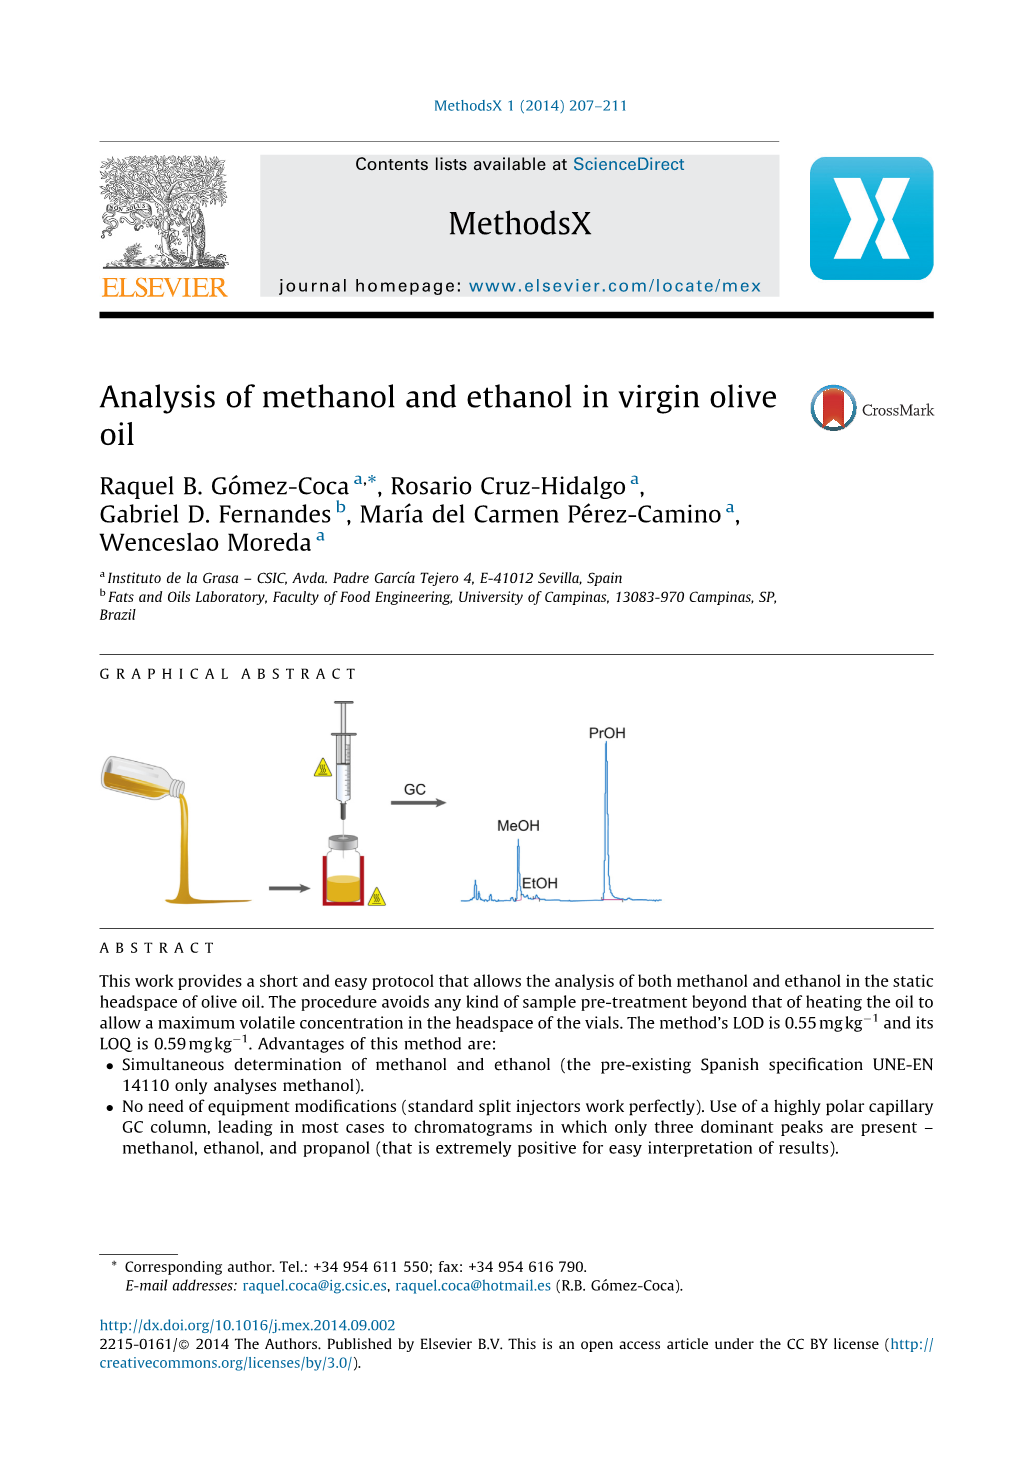 Analysis of Methanol and Ethanol in Virgin Olive Oil